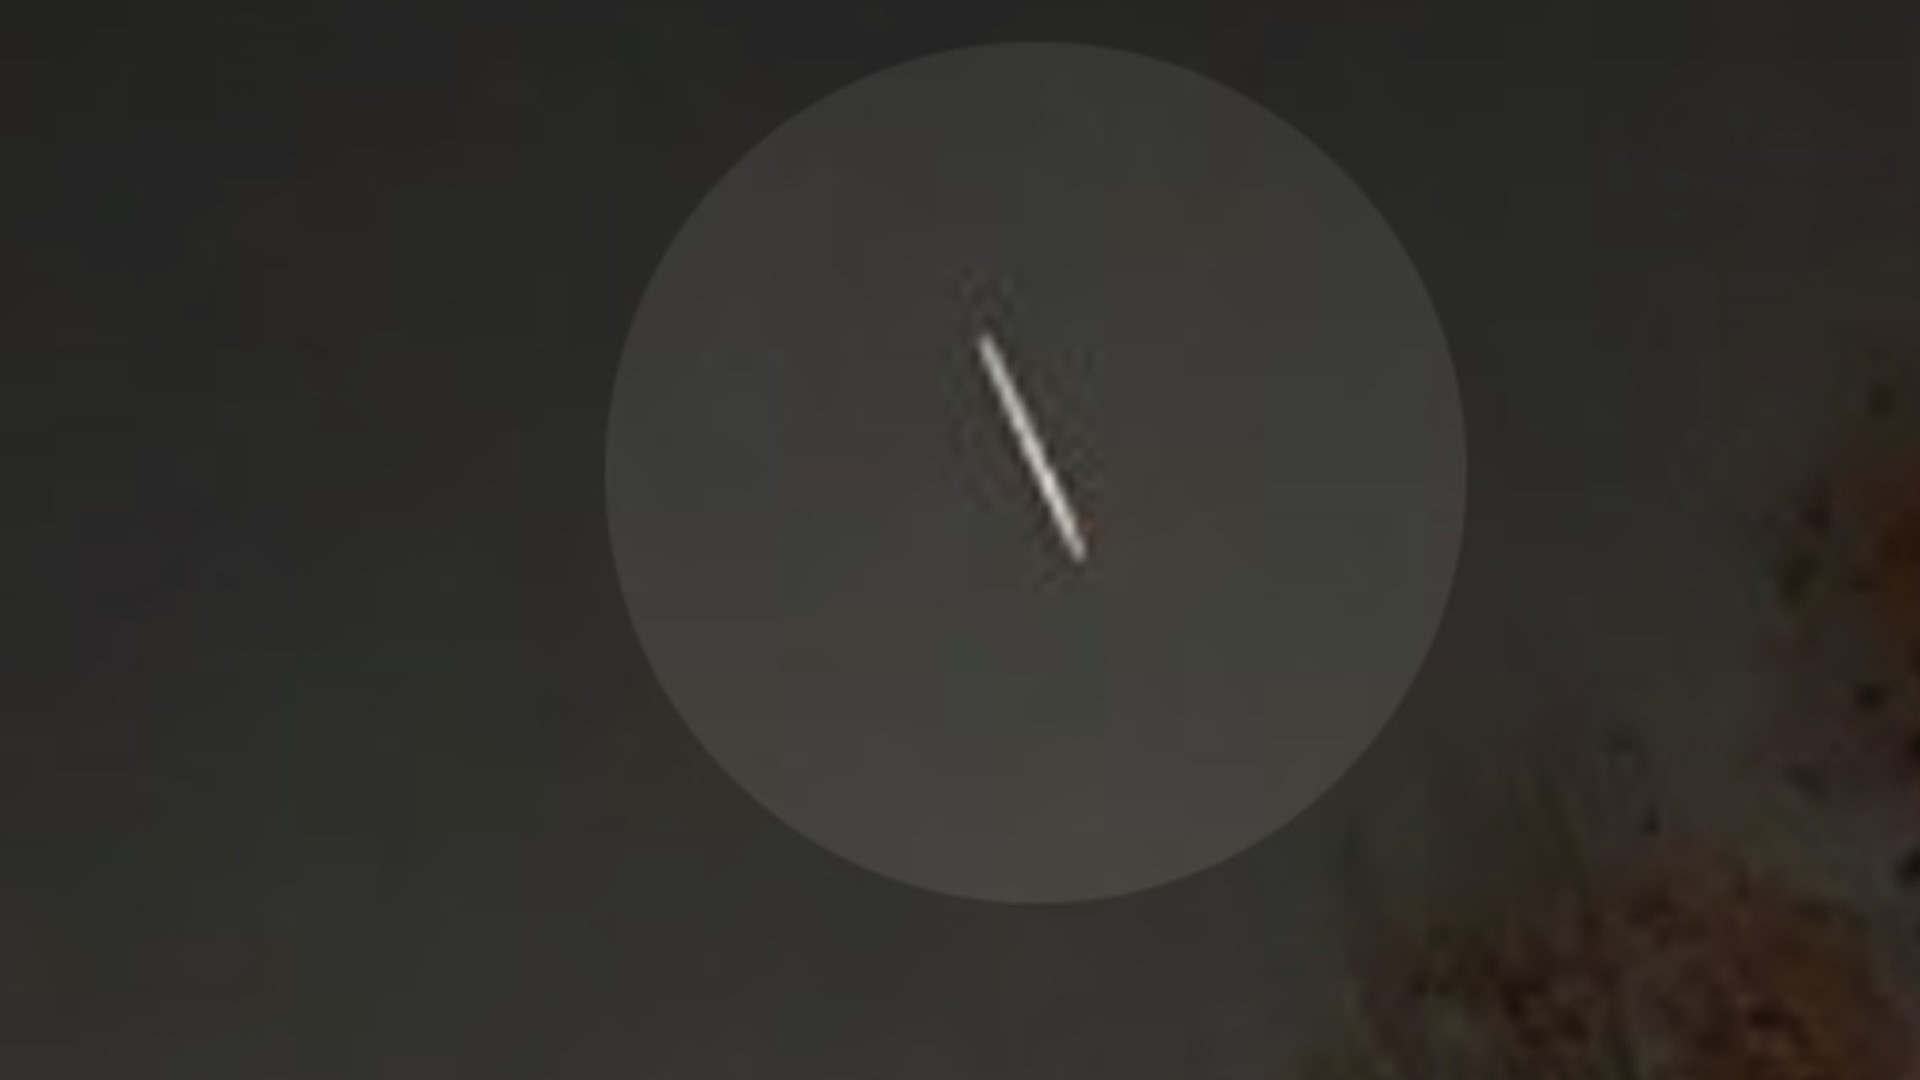 Long string of lights seen over Houston after latest launch of Starlink satellites via SpaceX.